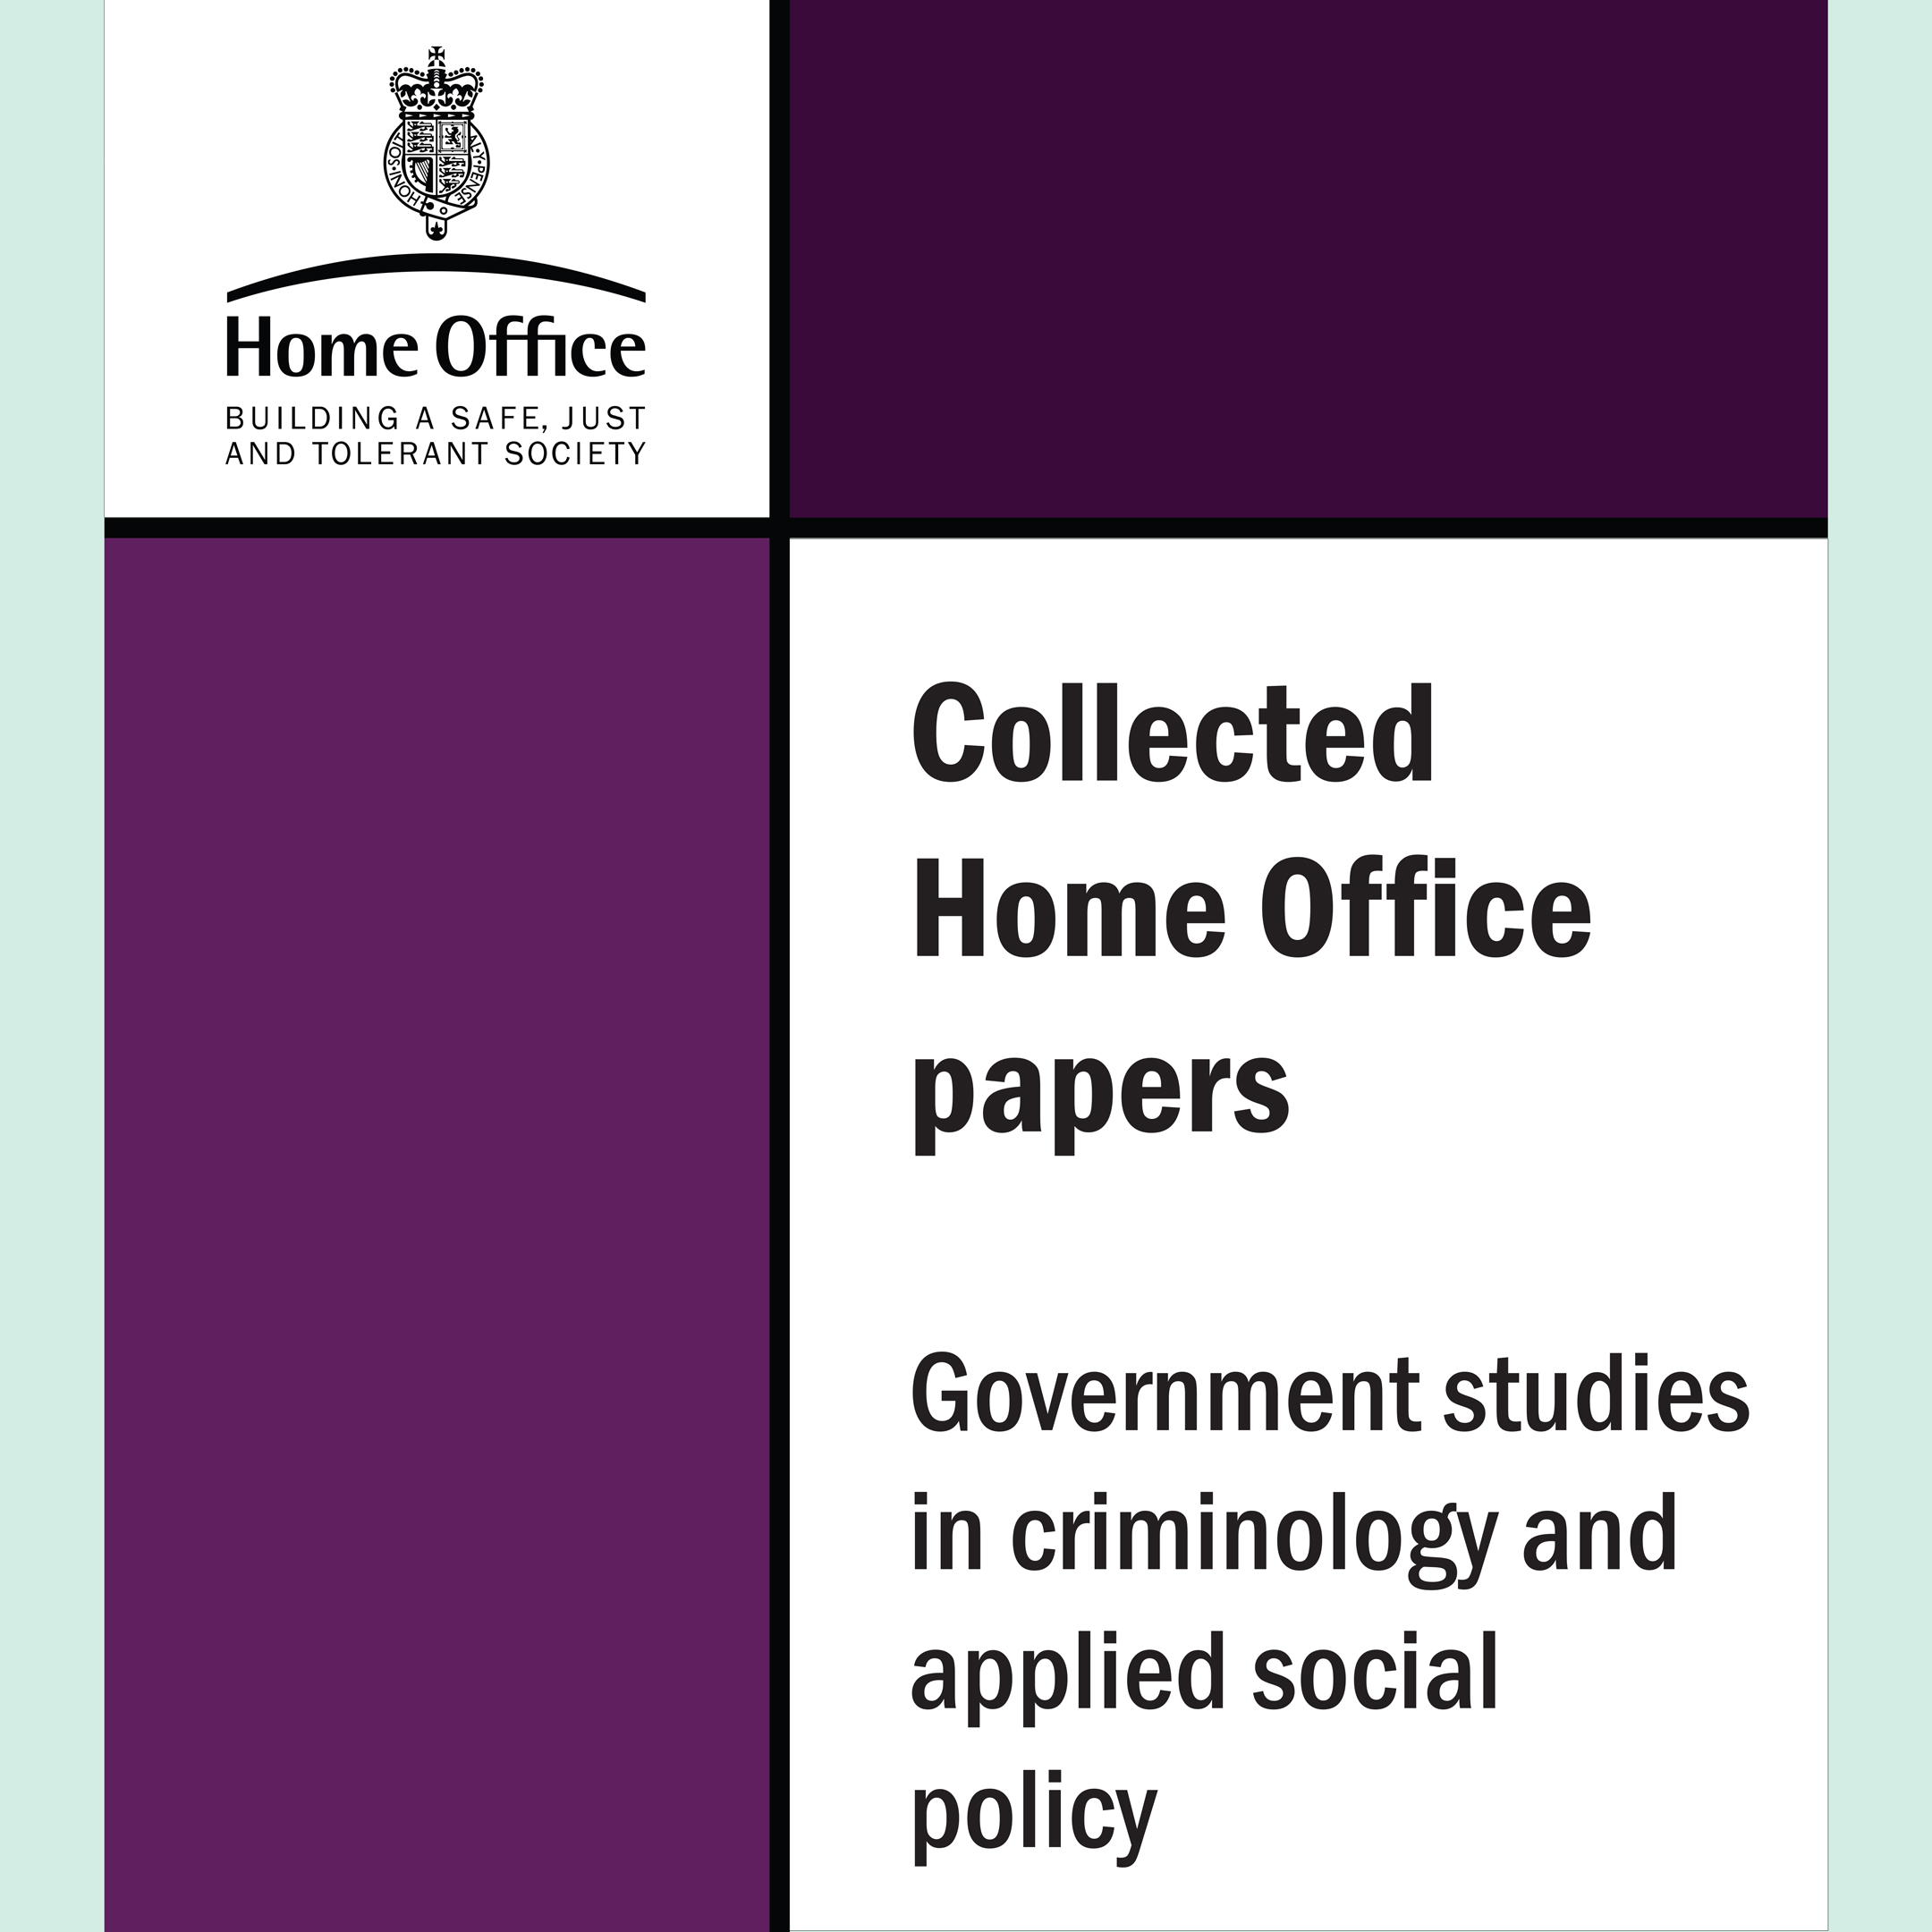 Home Office papers find a new home